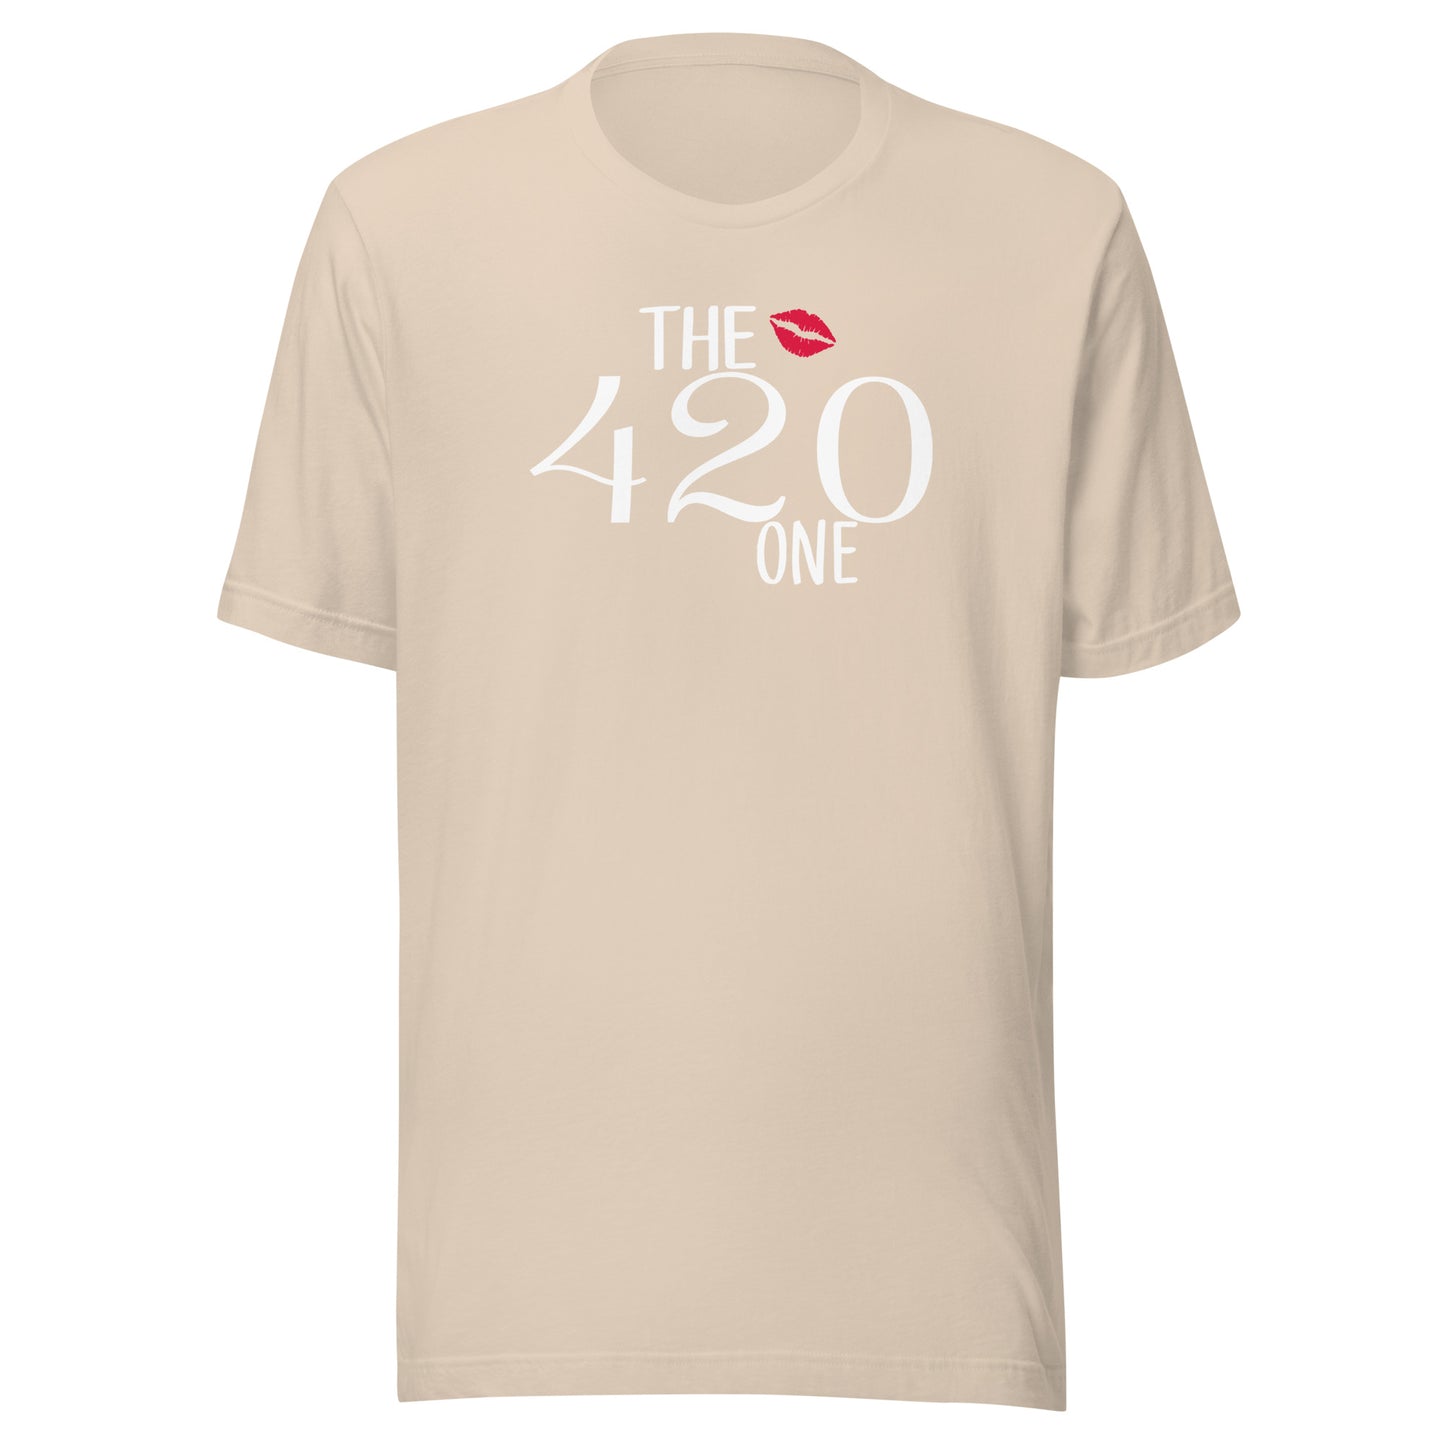 2XL - 3XL The 420 One (white letters)